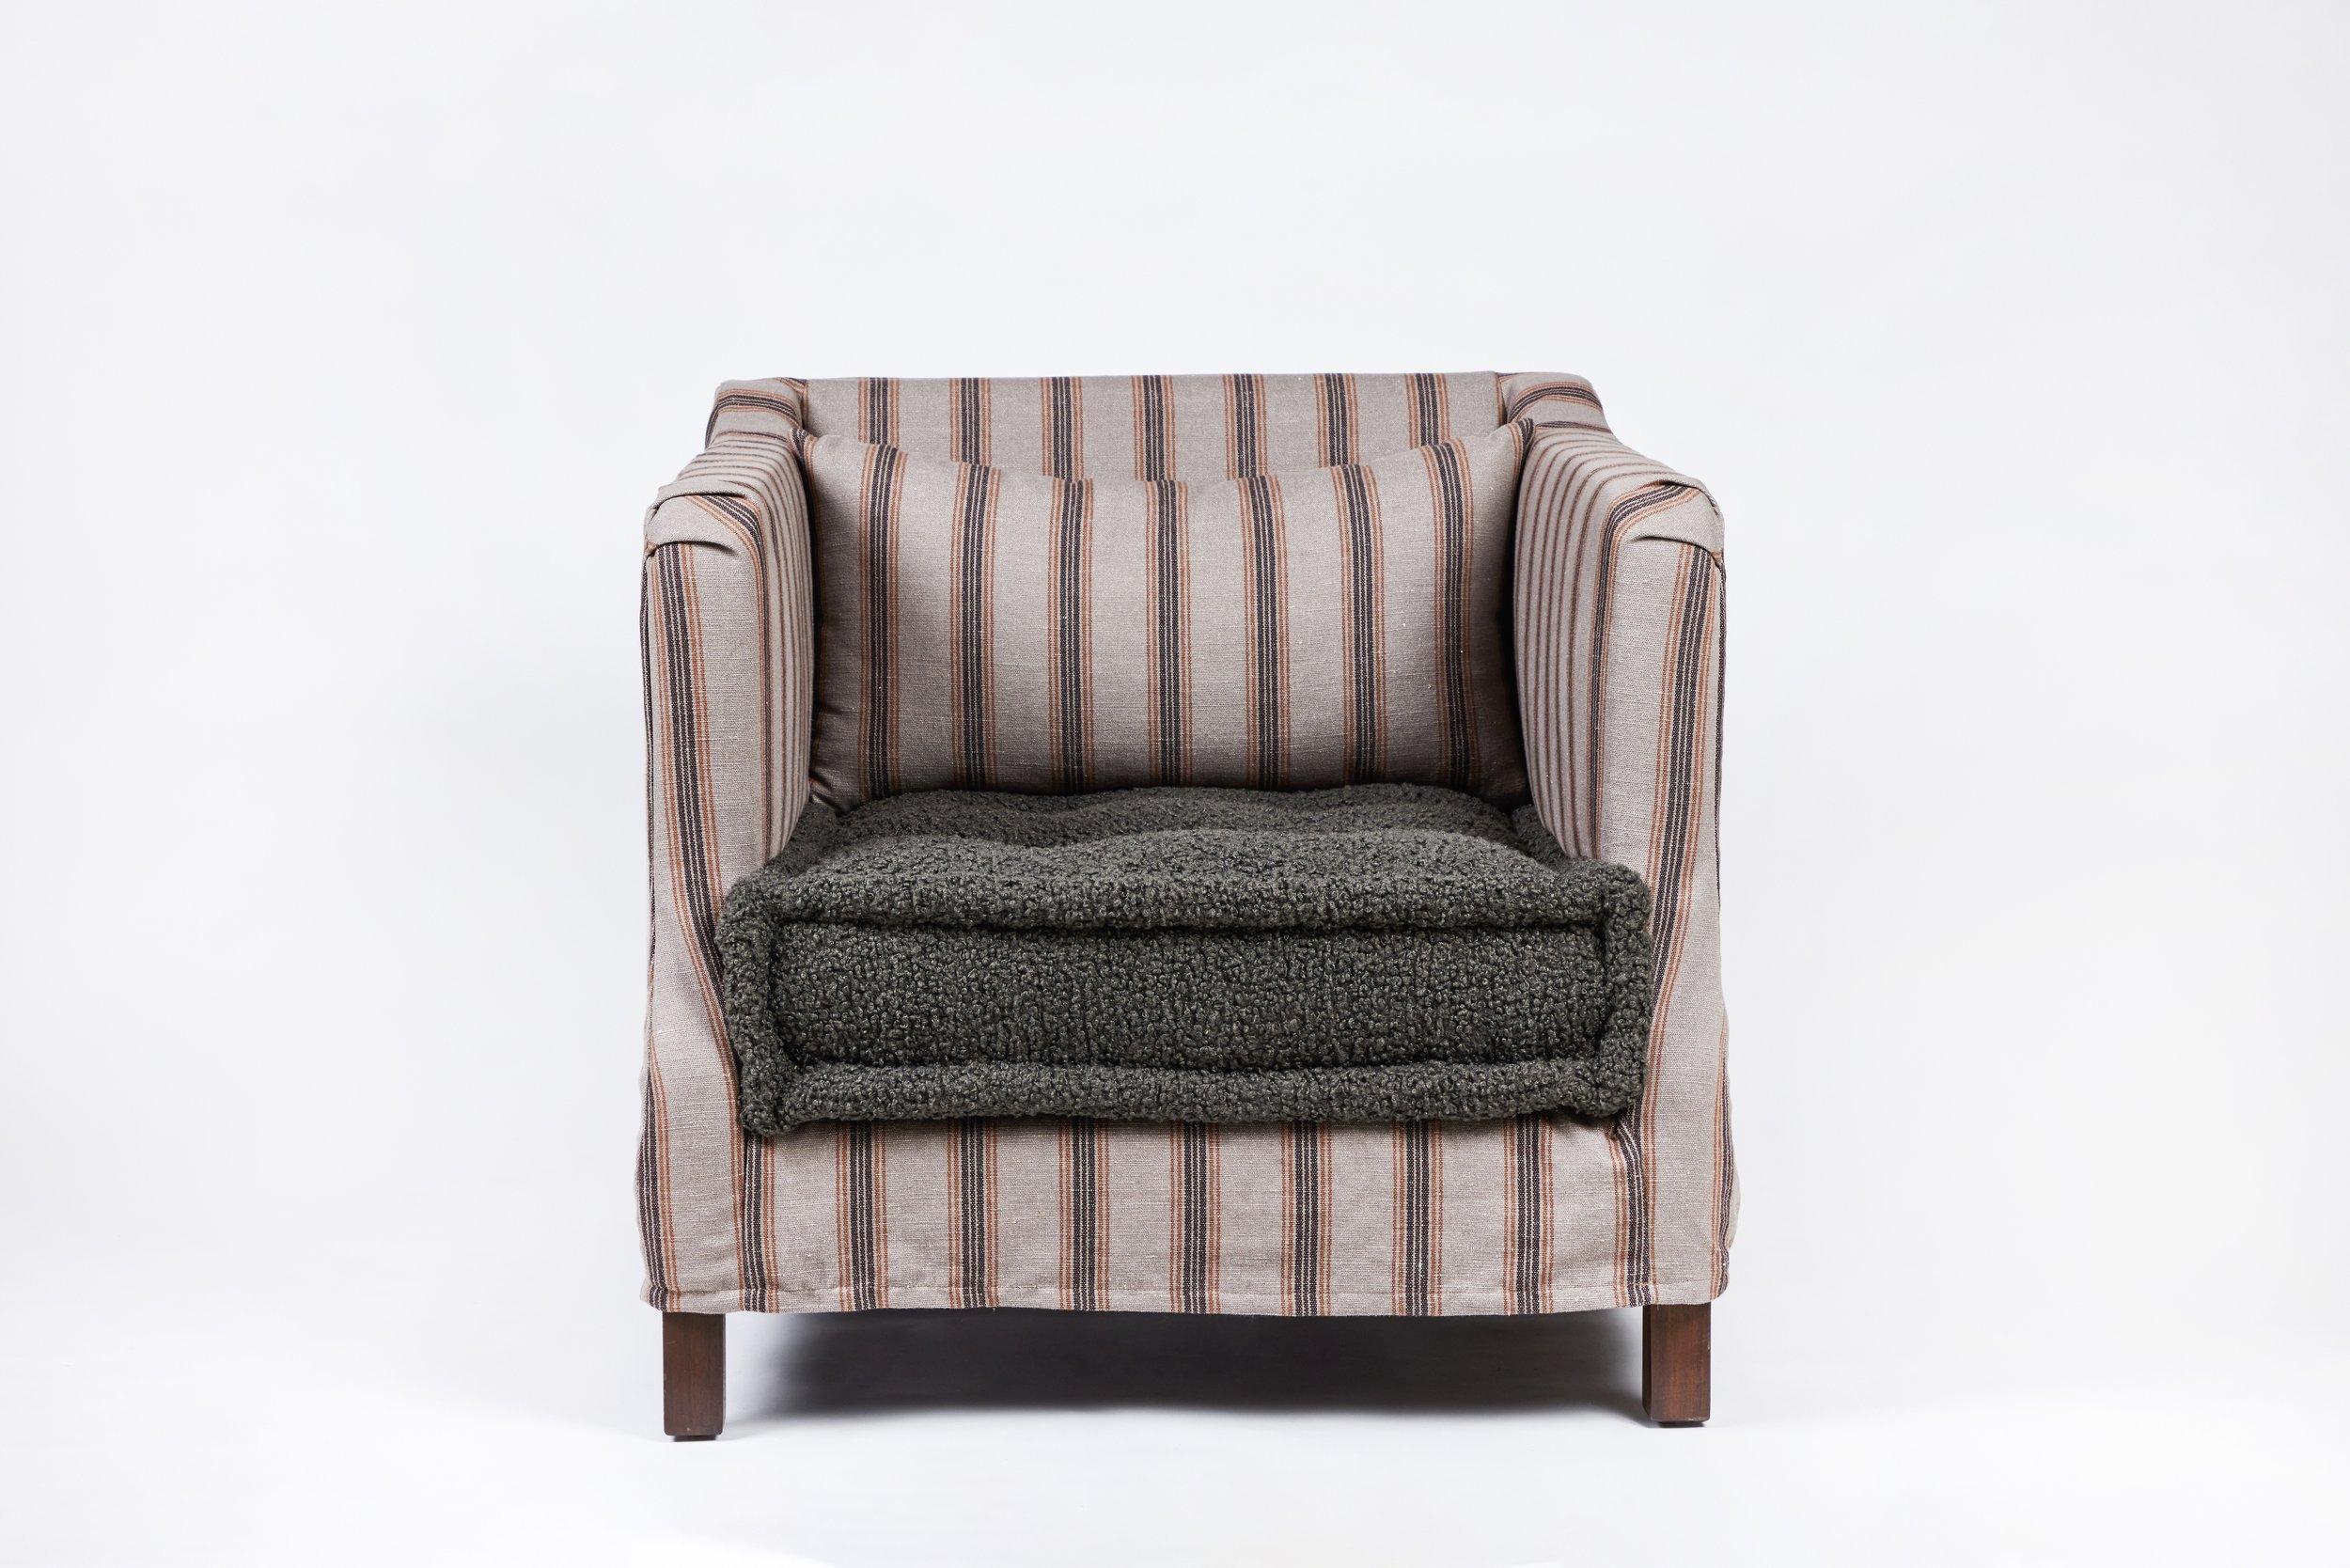 Martin & Brockett’s All Day Chair features a loose slipcover, loose back cushion and deep seat cushion- available for order in French style mattress or loose.

H 32 in. x W 34 in. x D 40 in. Seat Height 18”
Sold as C.O.M. only - 11 yards
Additional